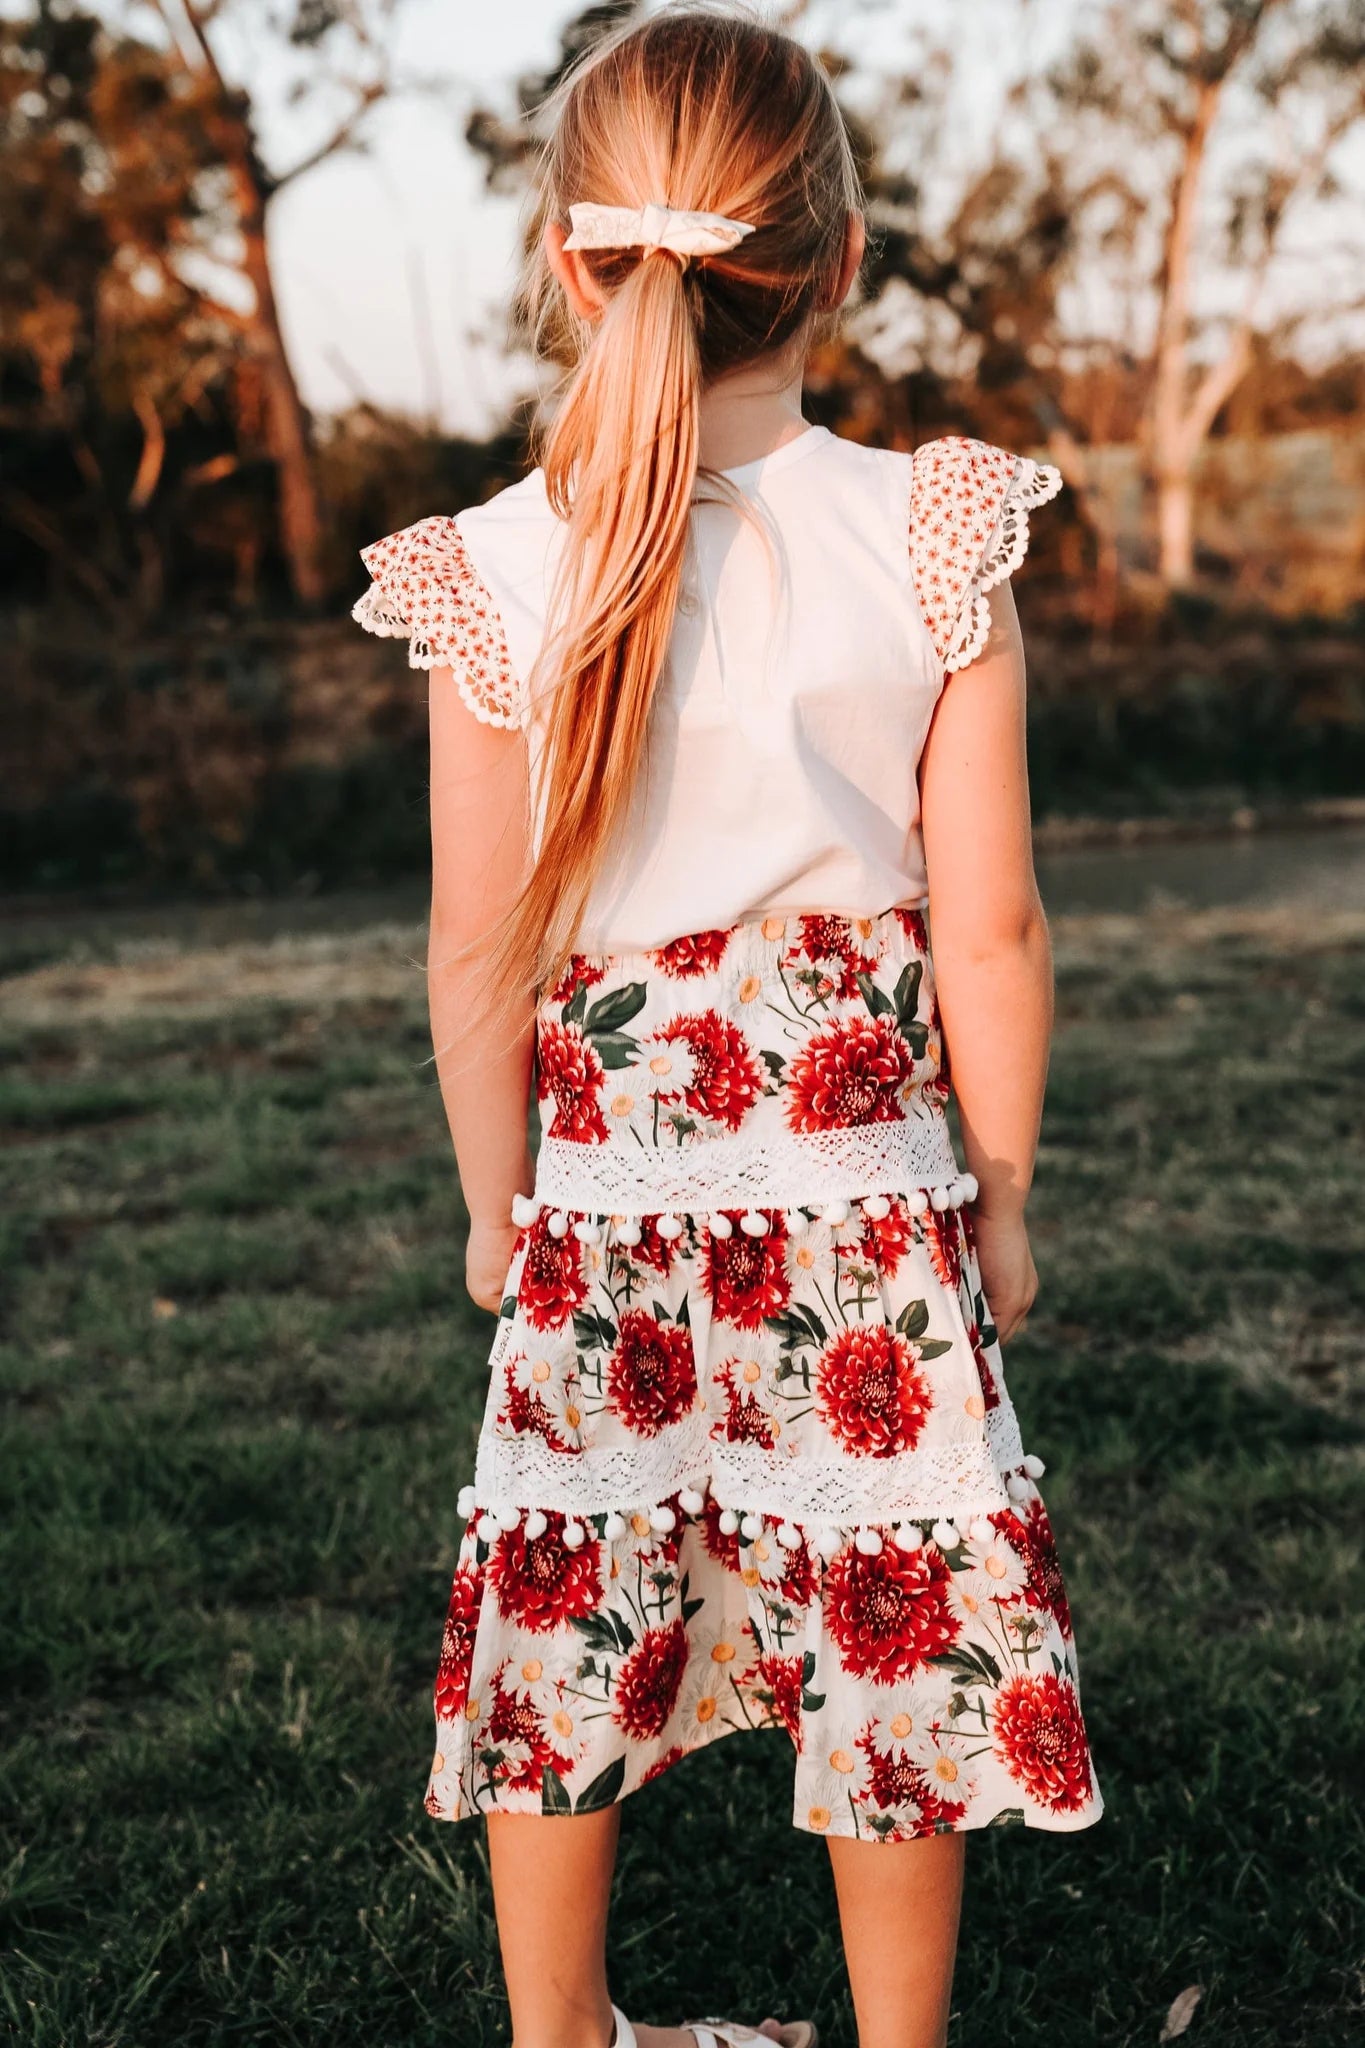 Girls Maggie Skirt - Amore Floral